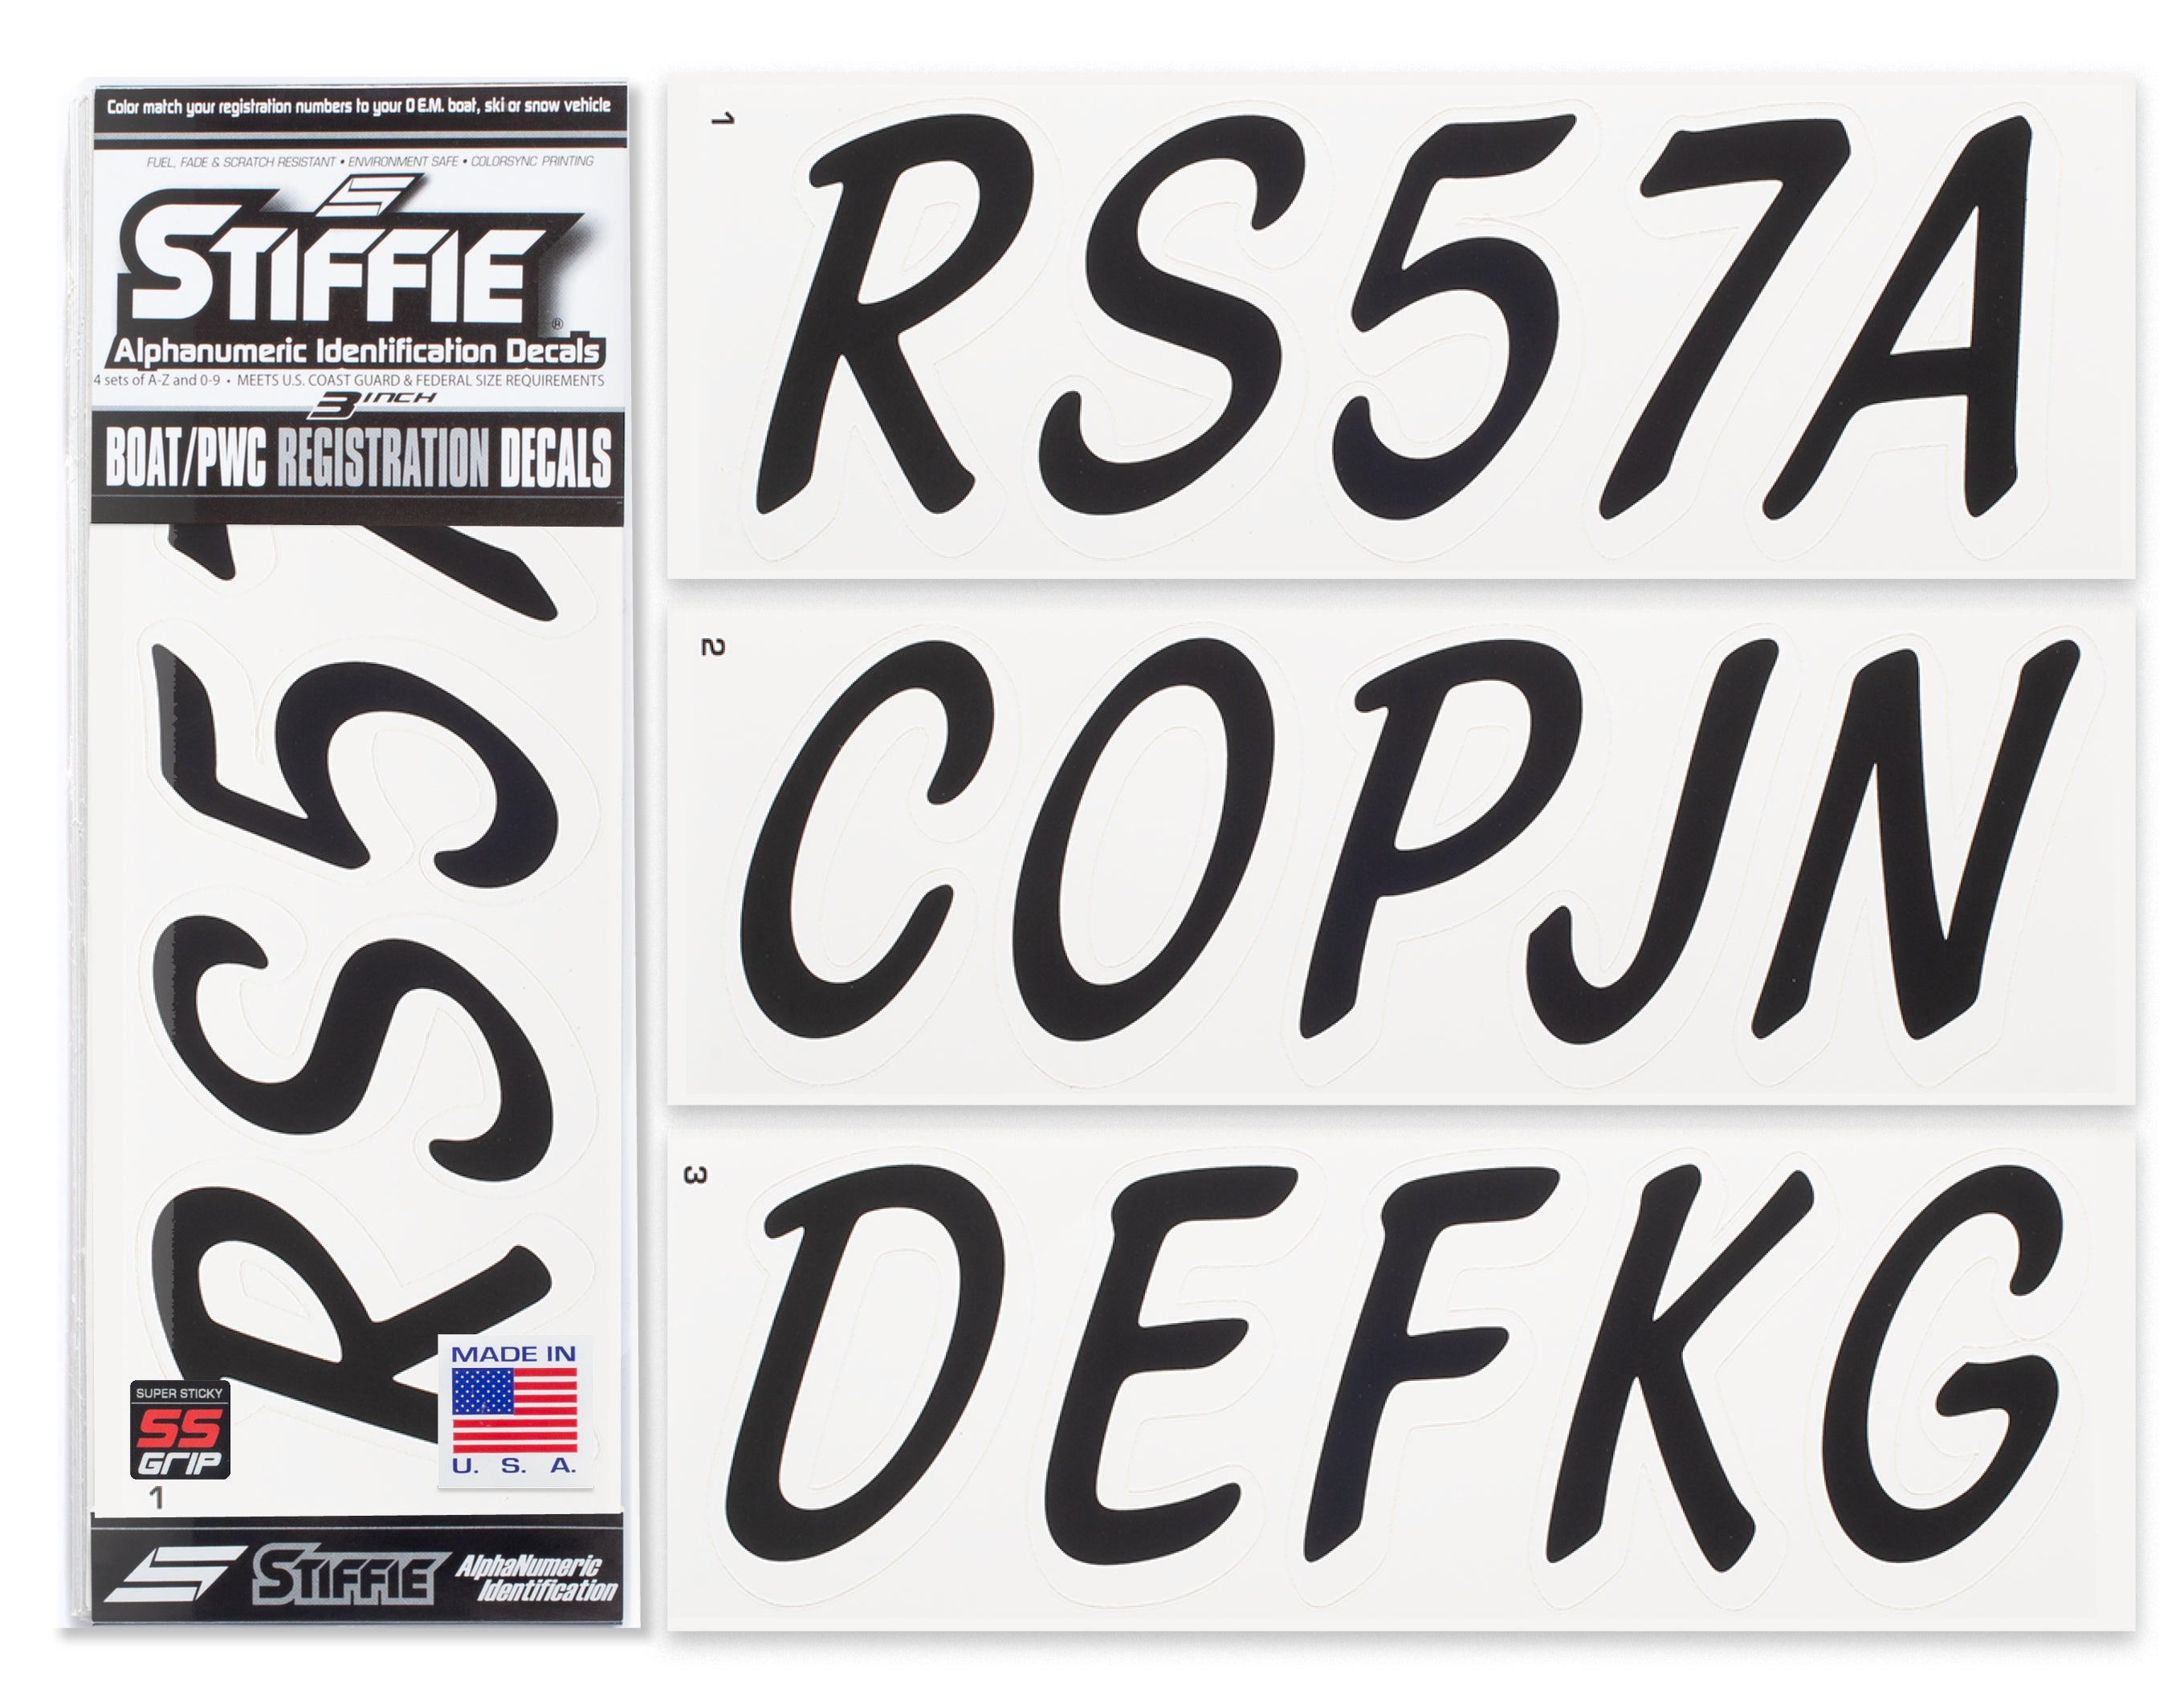 STIFFIE Whipline Solid Black/White Super Sticky 3" Alpha-Numeric Registration Identification Numbers Stickers Decals for Boats & Personal Watercraft